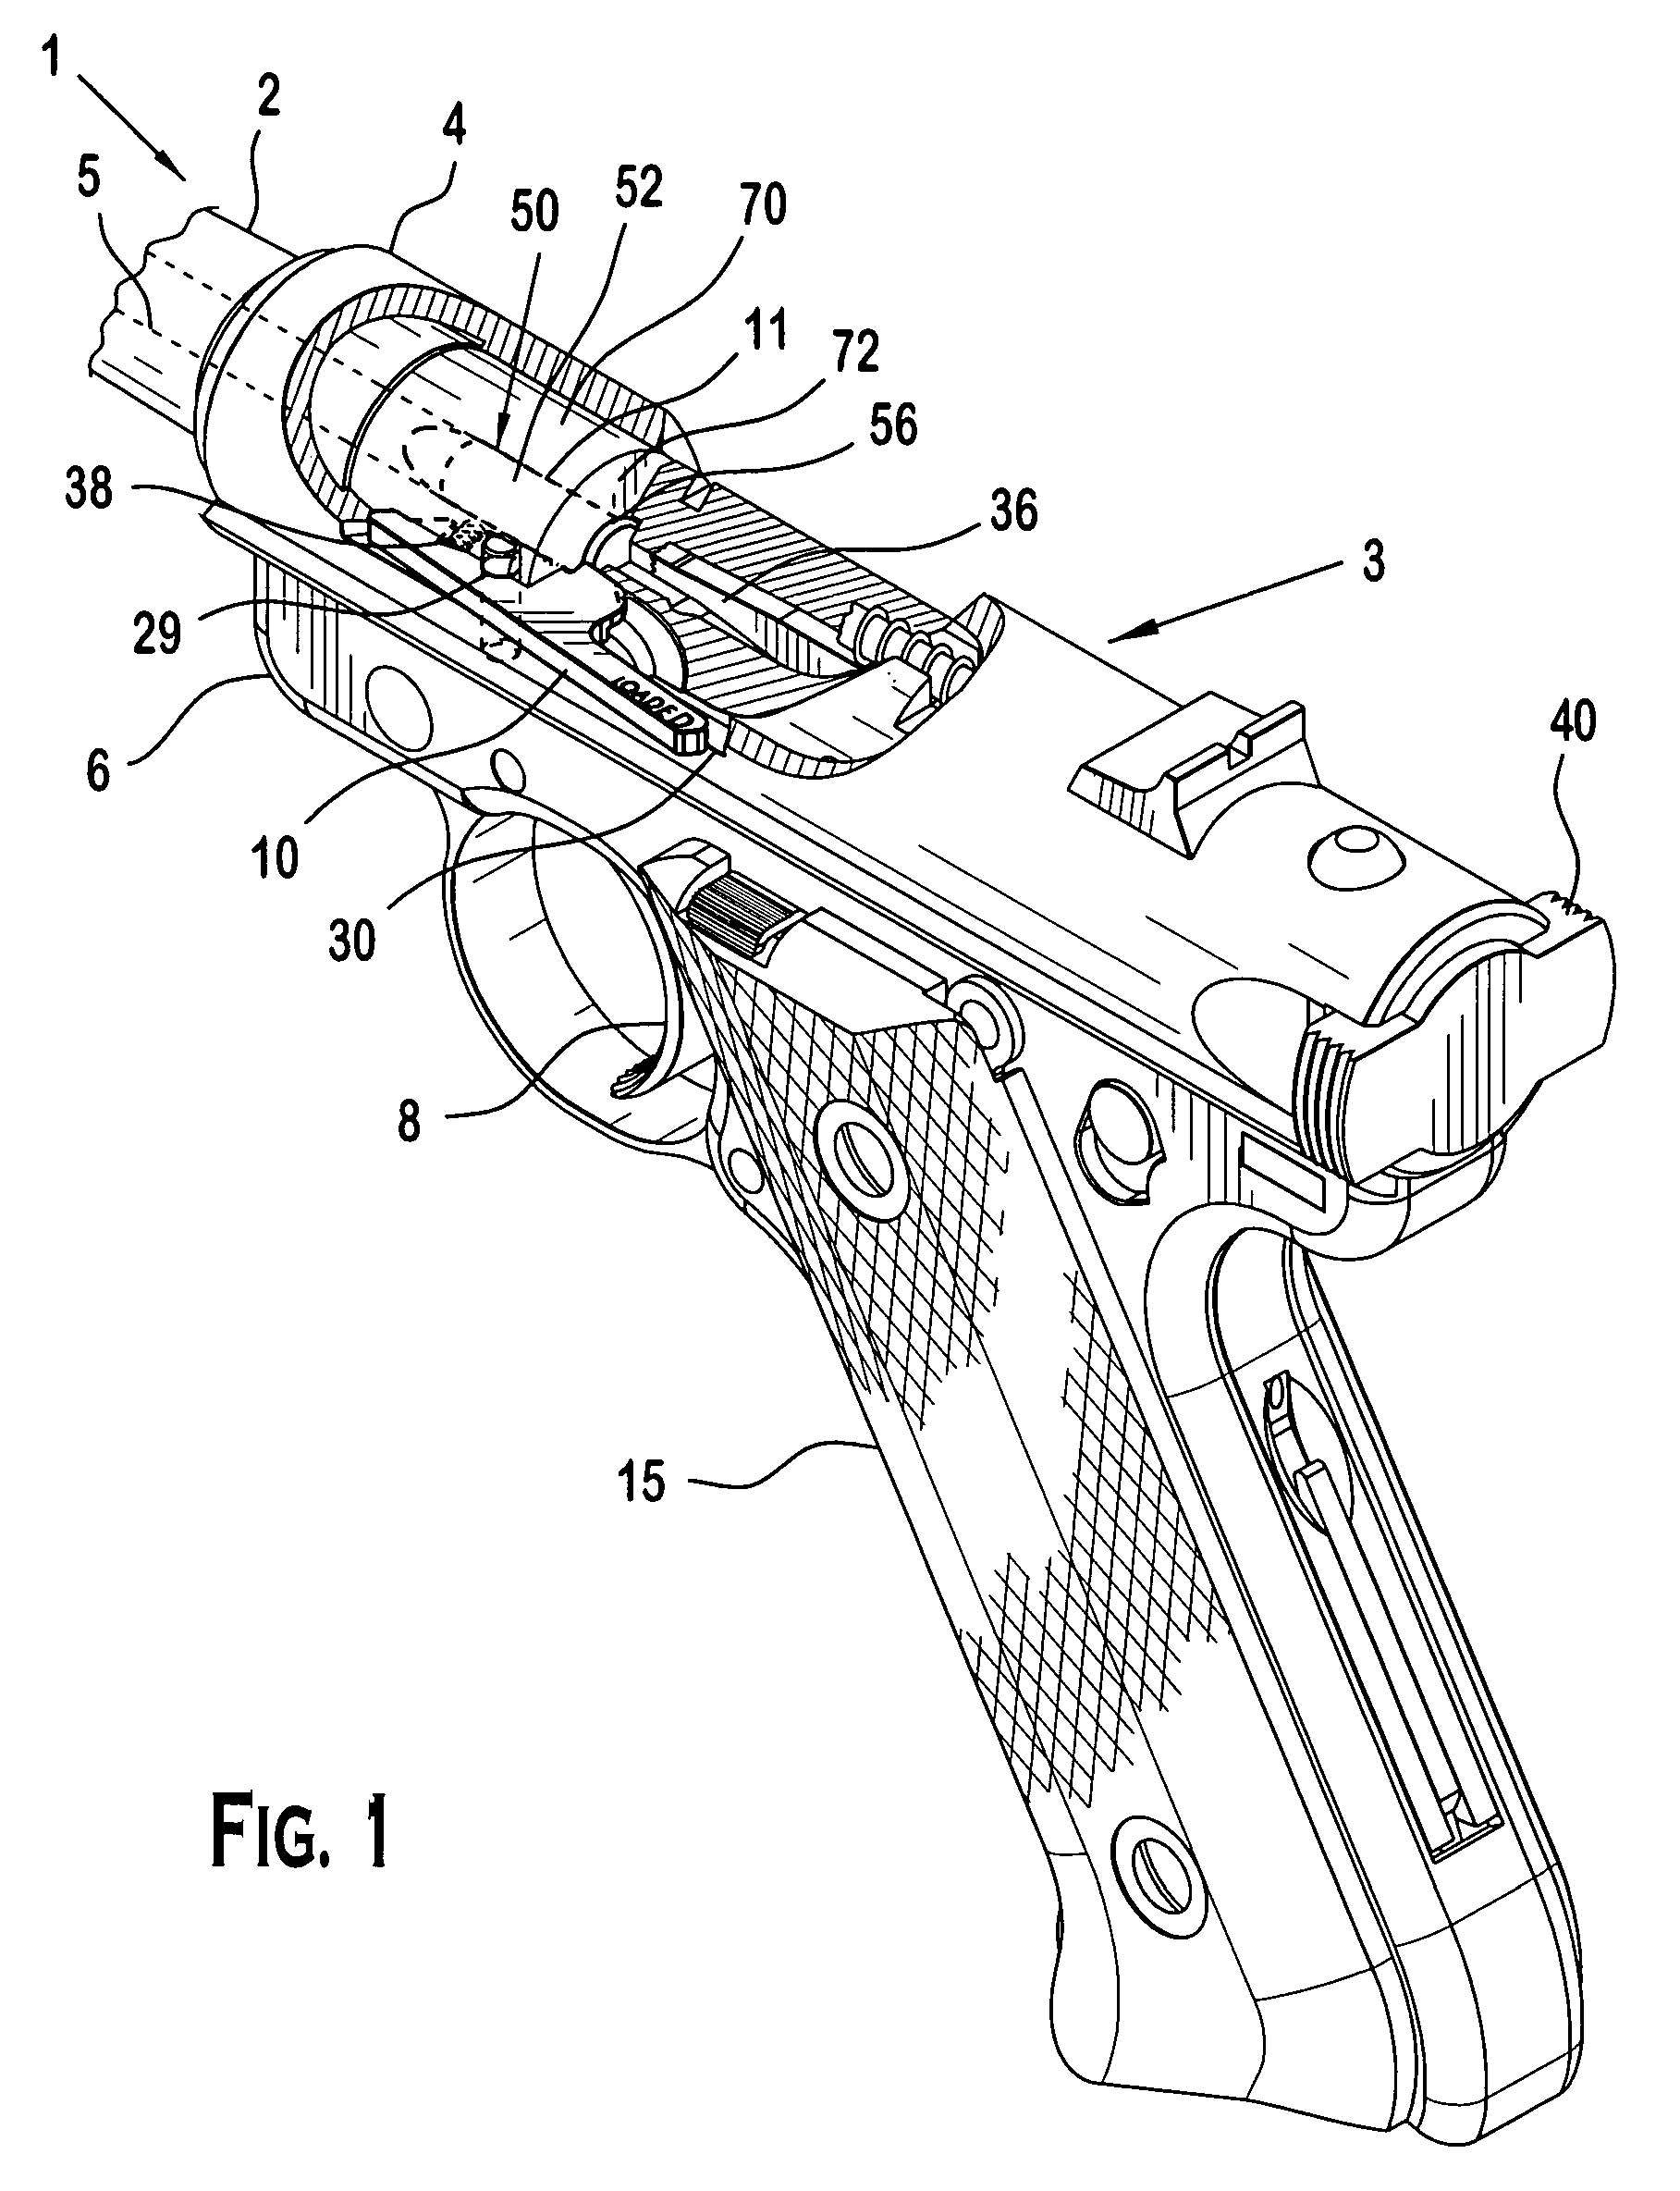 Pistol with loaded chamber indicator